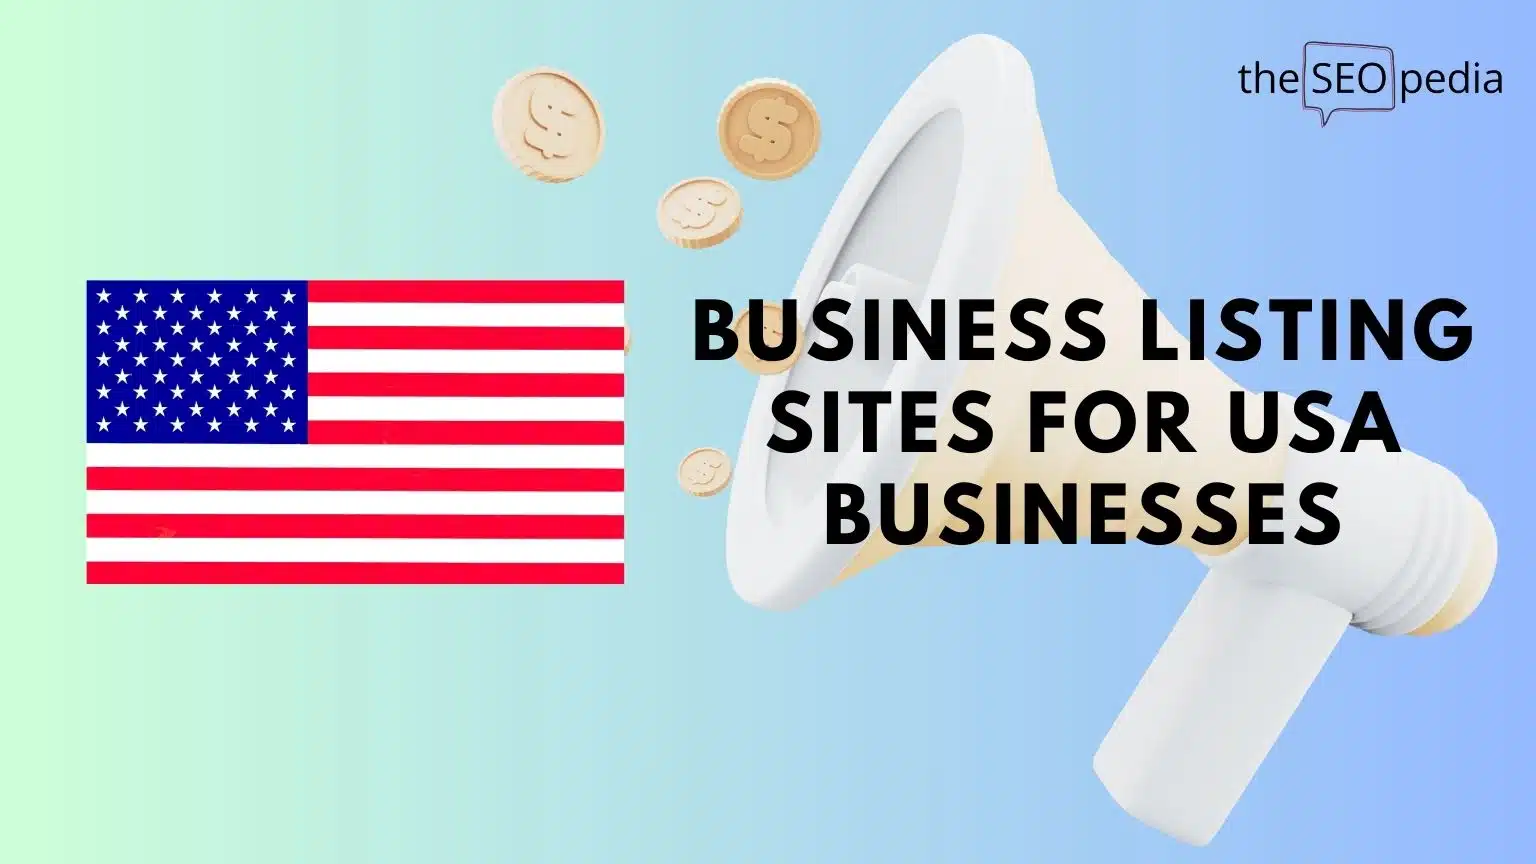 Business listing sites for USA